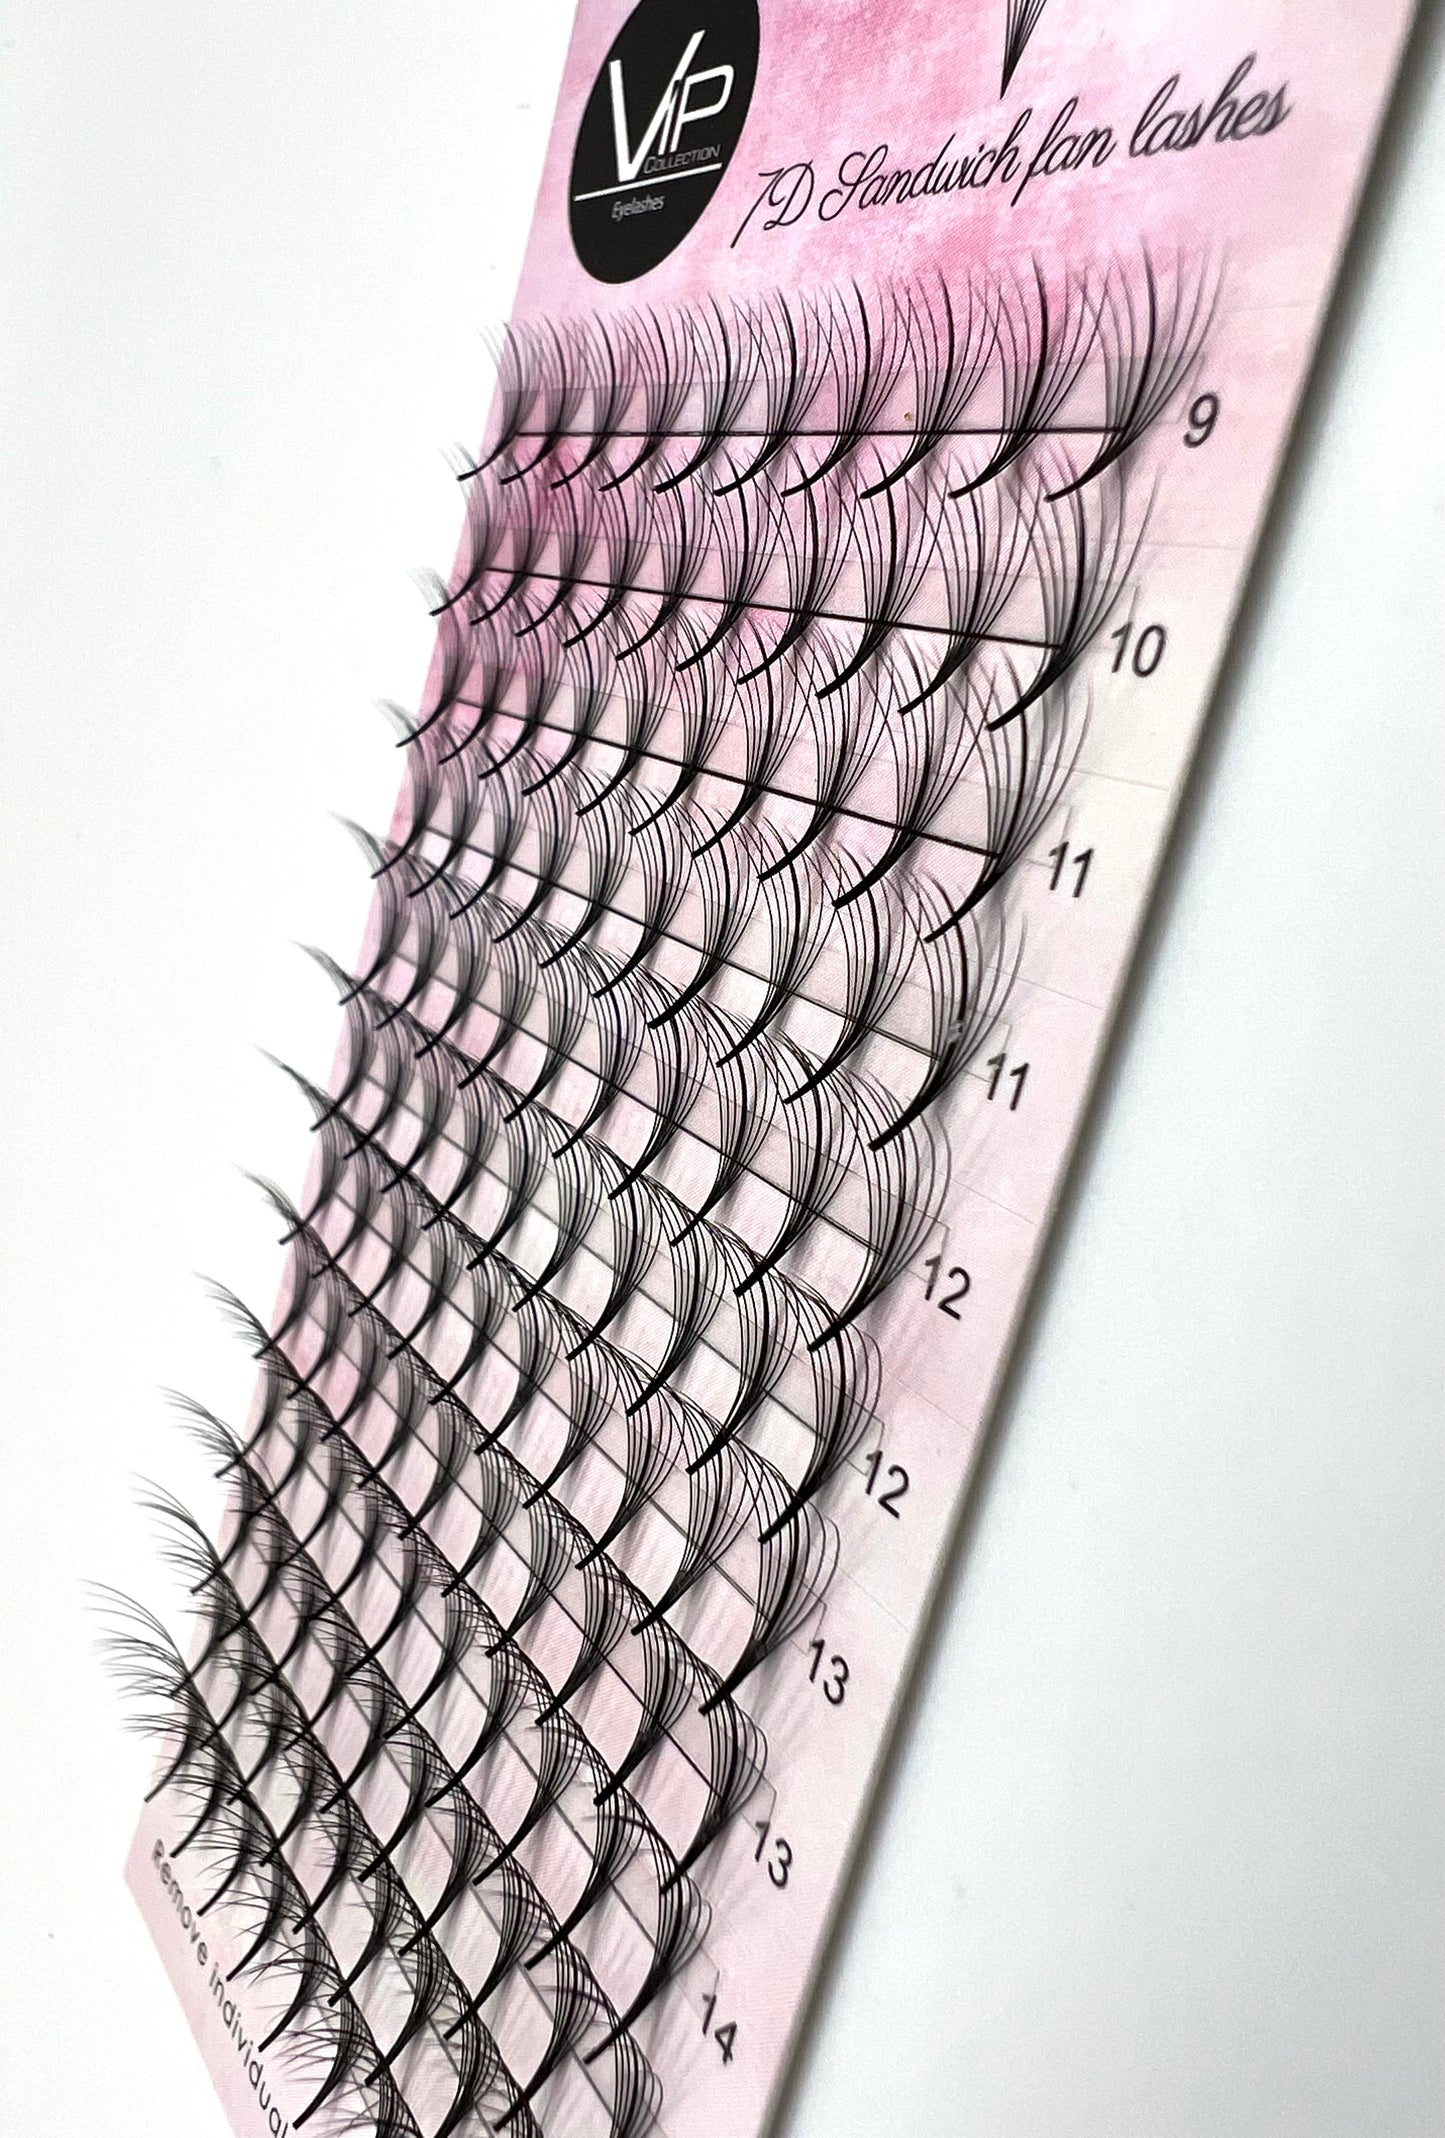 VIP 7D Sandwich Fan Lashes 0.05 12 lines C Mix - D Mix - Regular and Large Trays